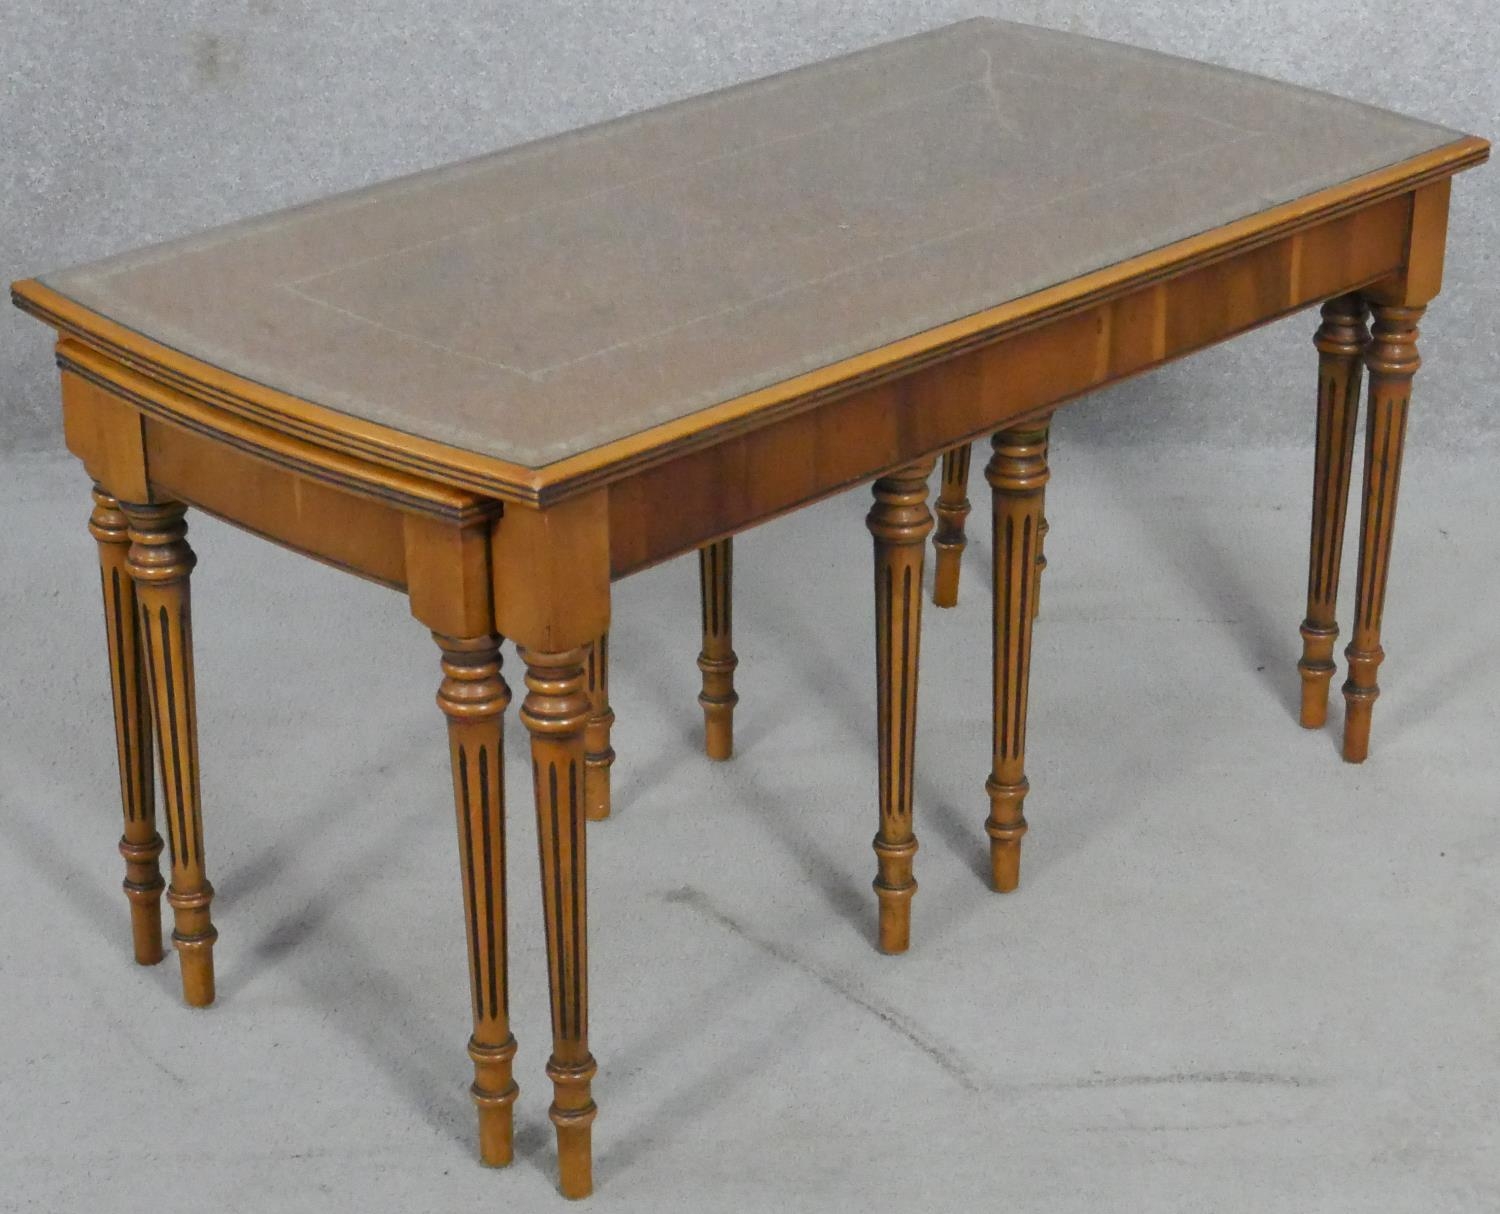 A nest of Regency style yew wood occasional tables with plate glass and inset tooled leather tops on - Image 3 of 6